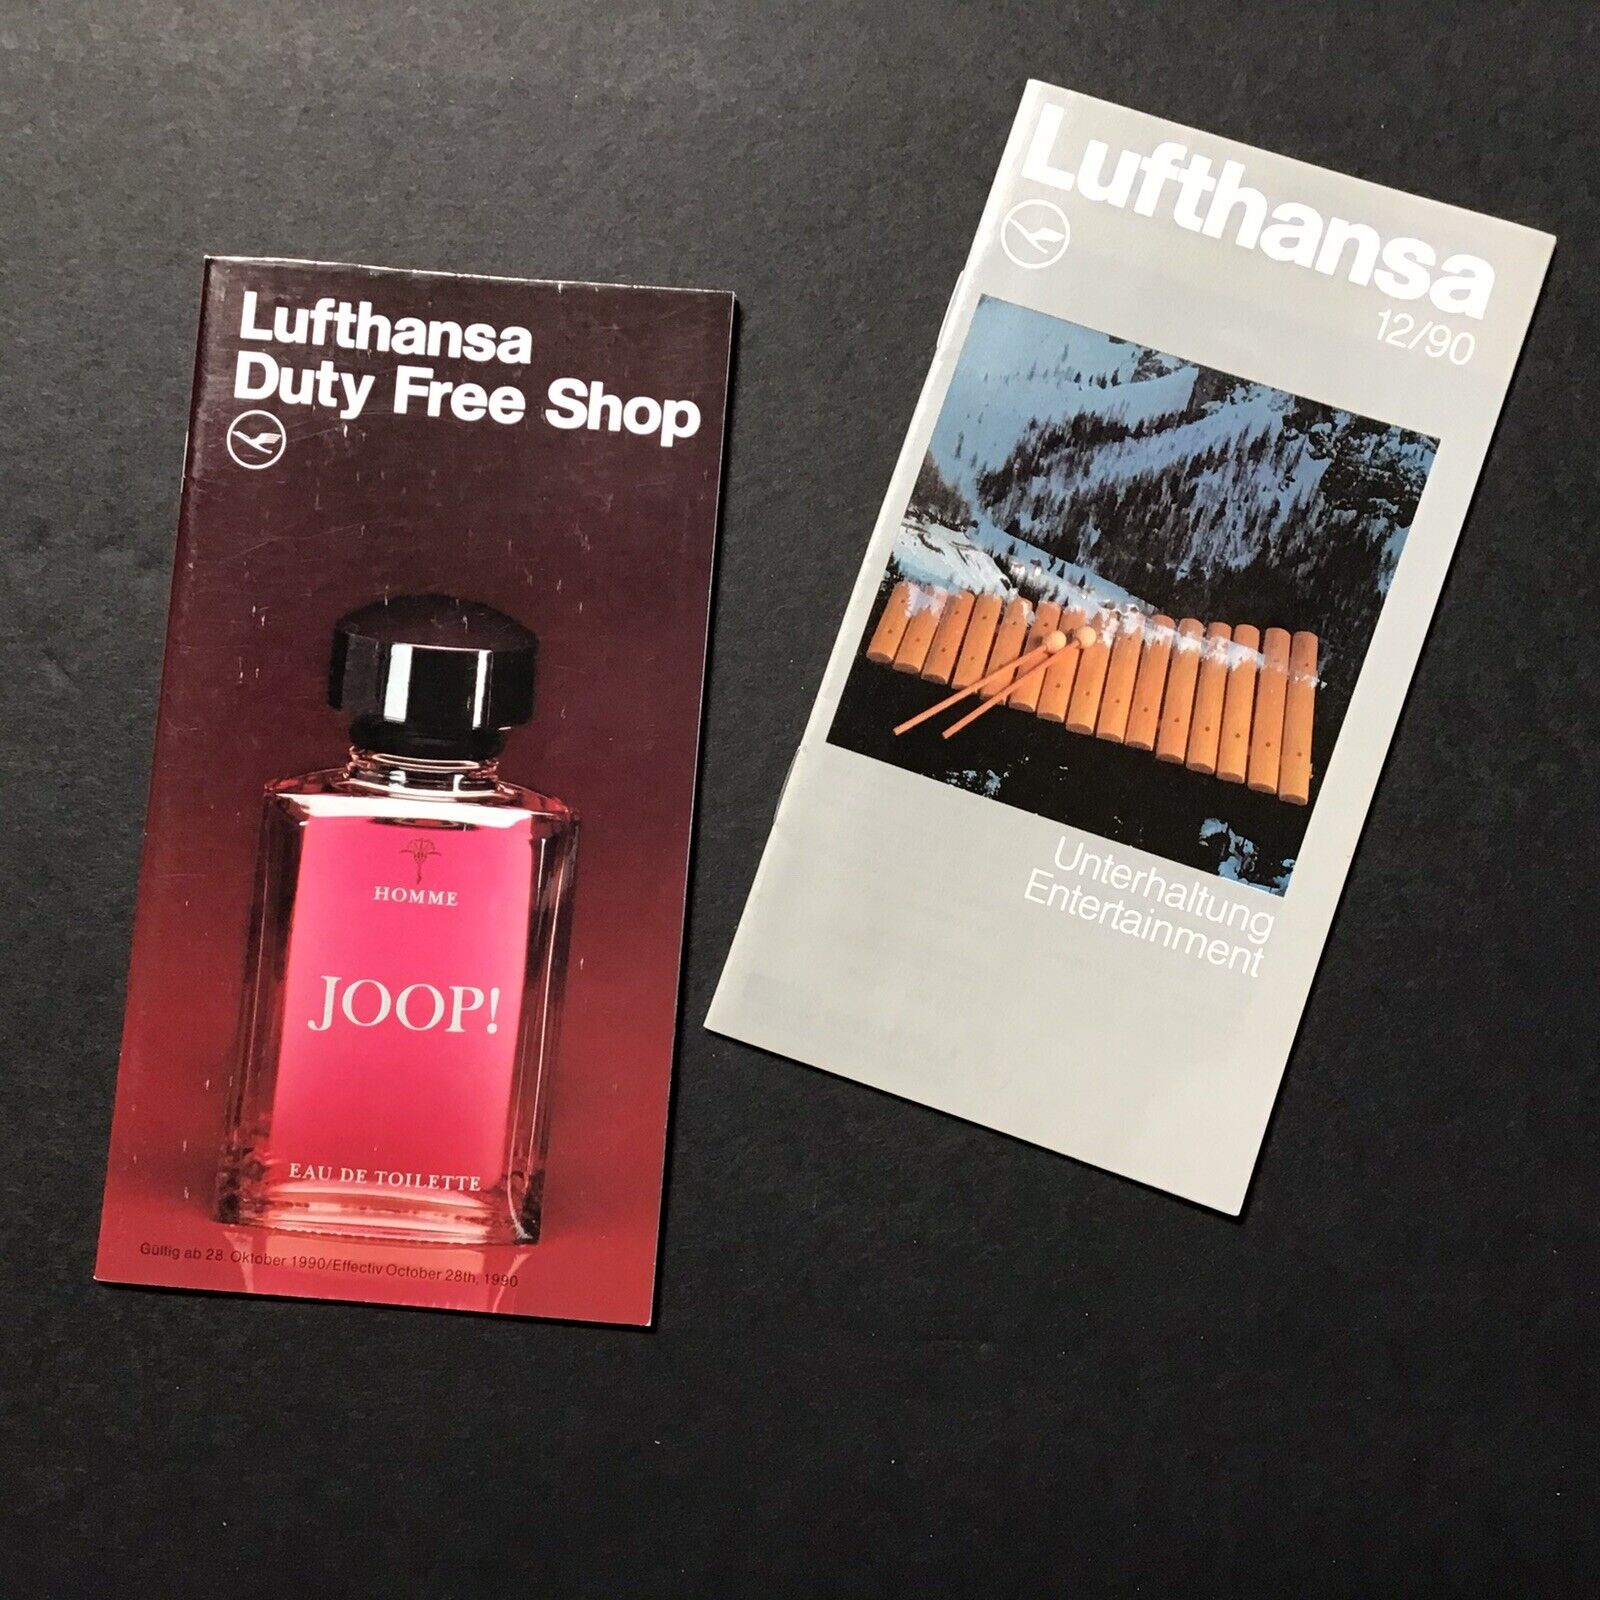 Lufthansa Airlines 1990 Duty Free Catalog and InFlight Entertainment - Set of 2